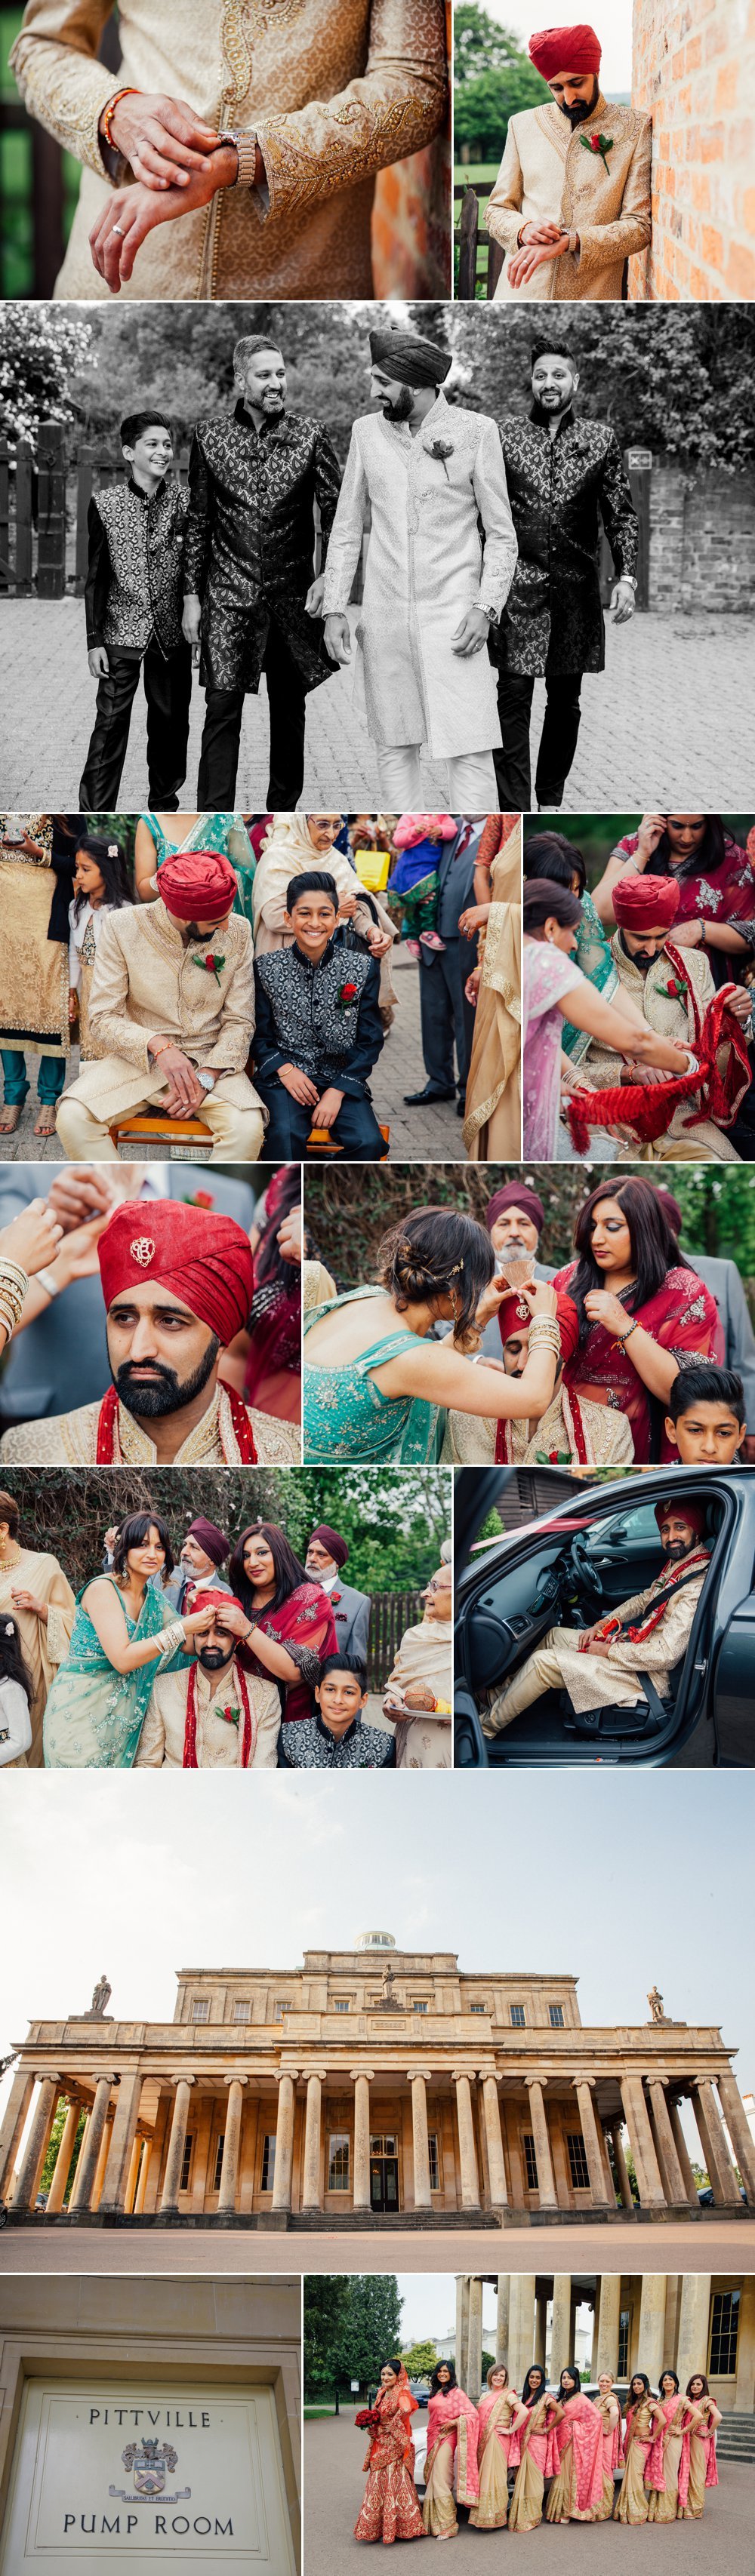 Pittville Pumps Indian Wedding Photography - Image 2